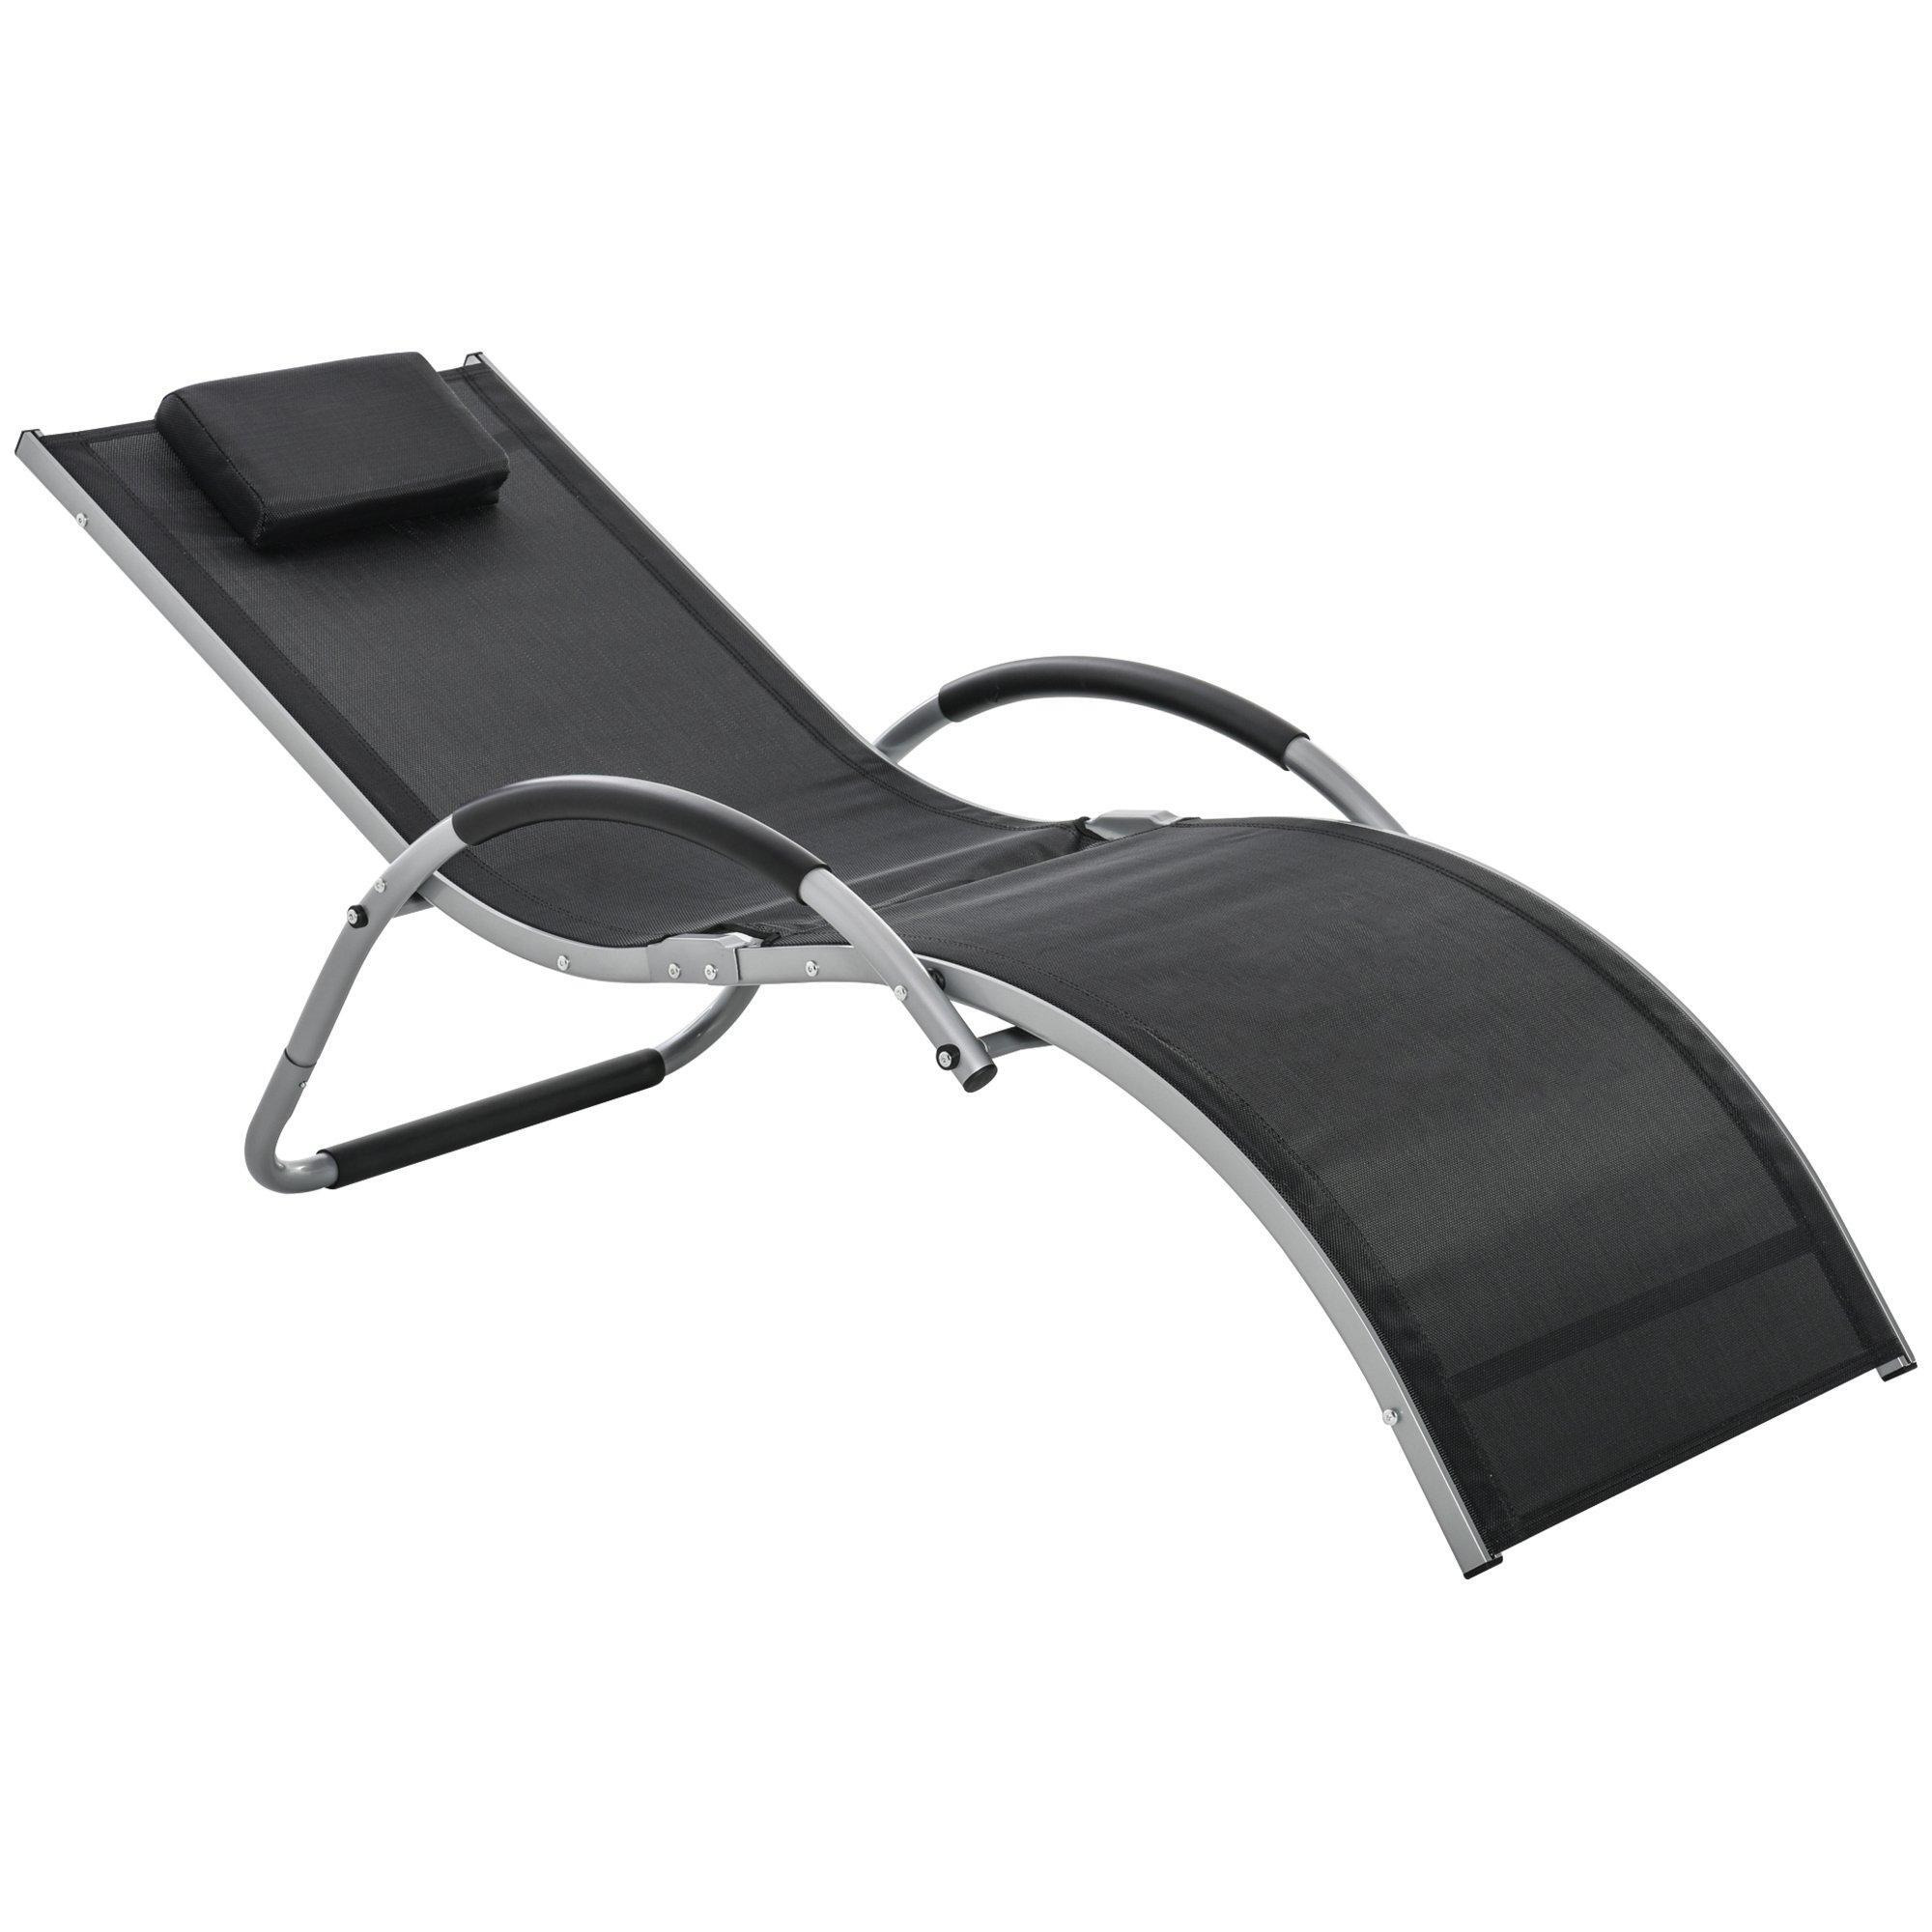 Sun Lounge Recliner Lounge Chair Design Ergonomic with Pillow - image 1